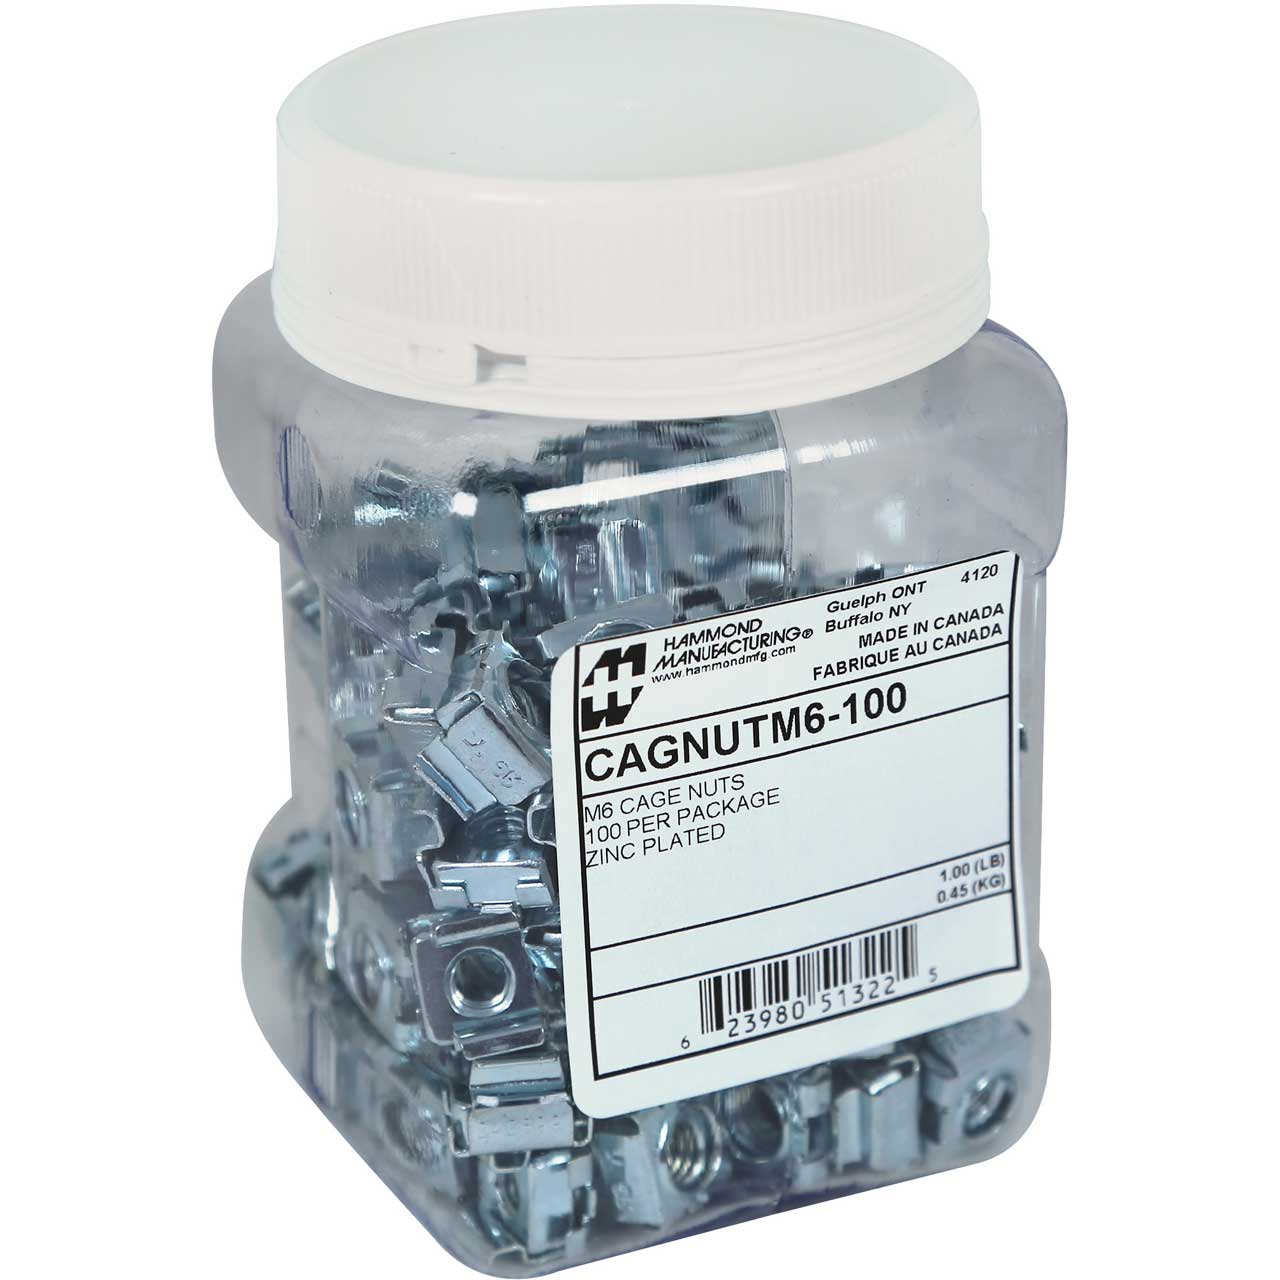 Hammond CAGNUTM6-100 Rear Loading M6 Cage Nuts in Plastic Jar - 100/Pack CAGNUTM6-100